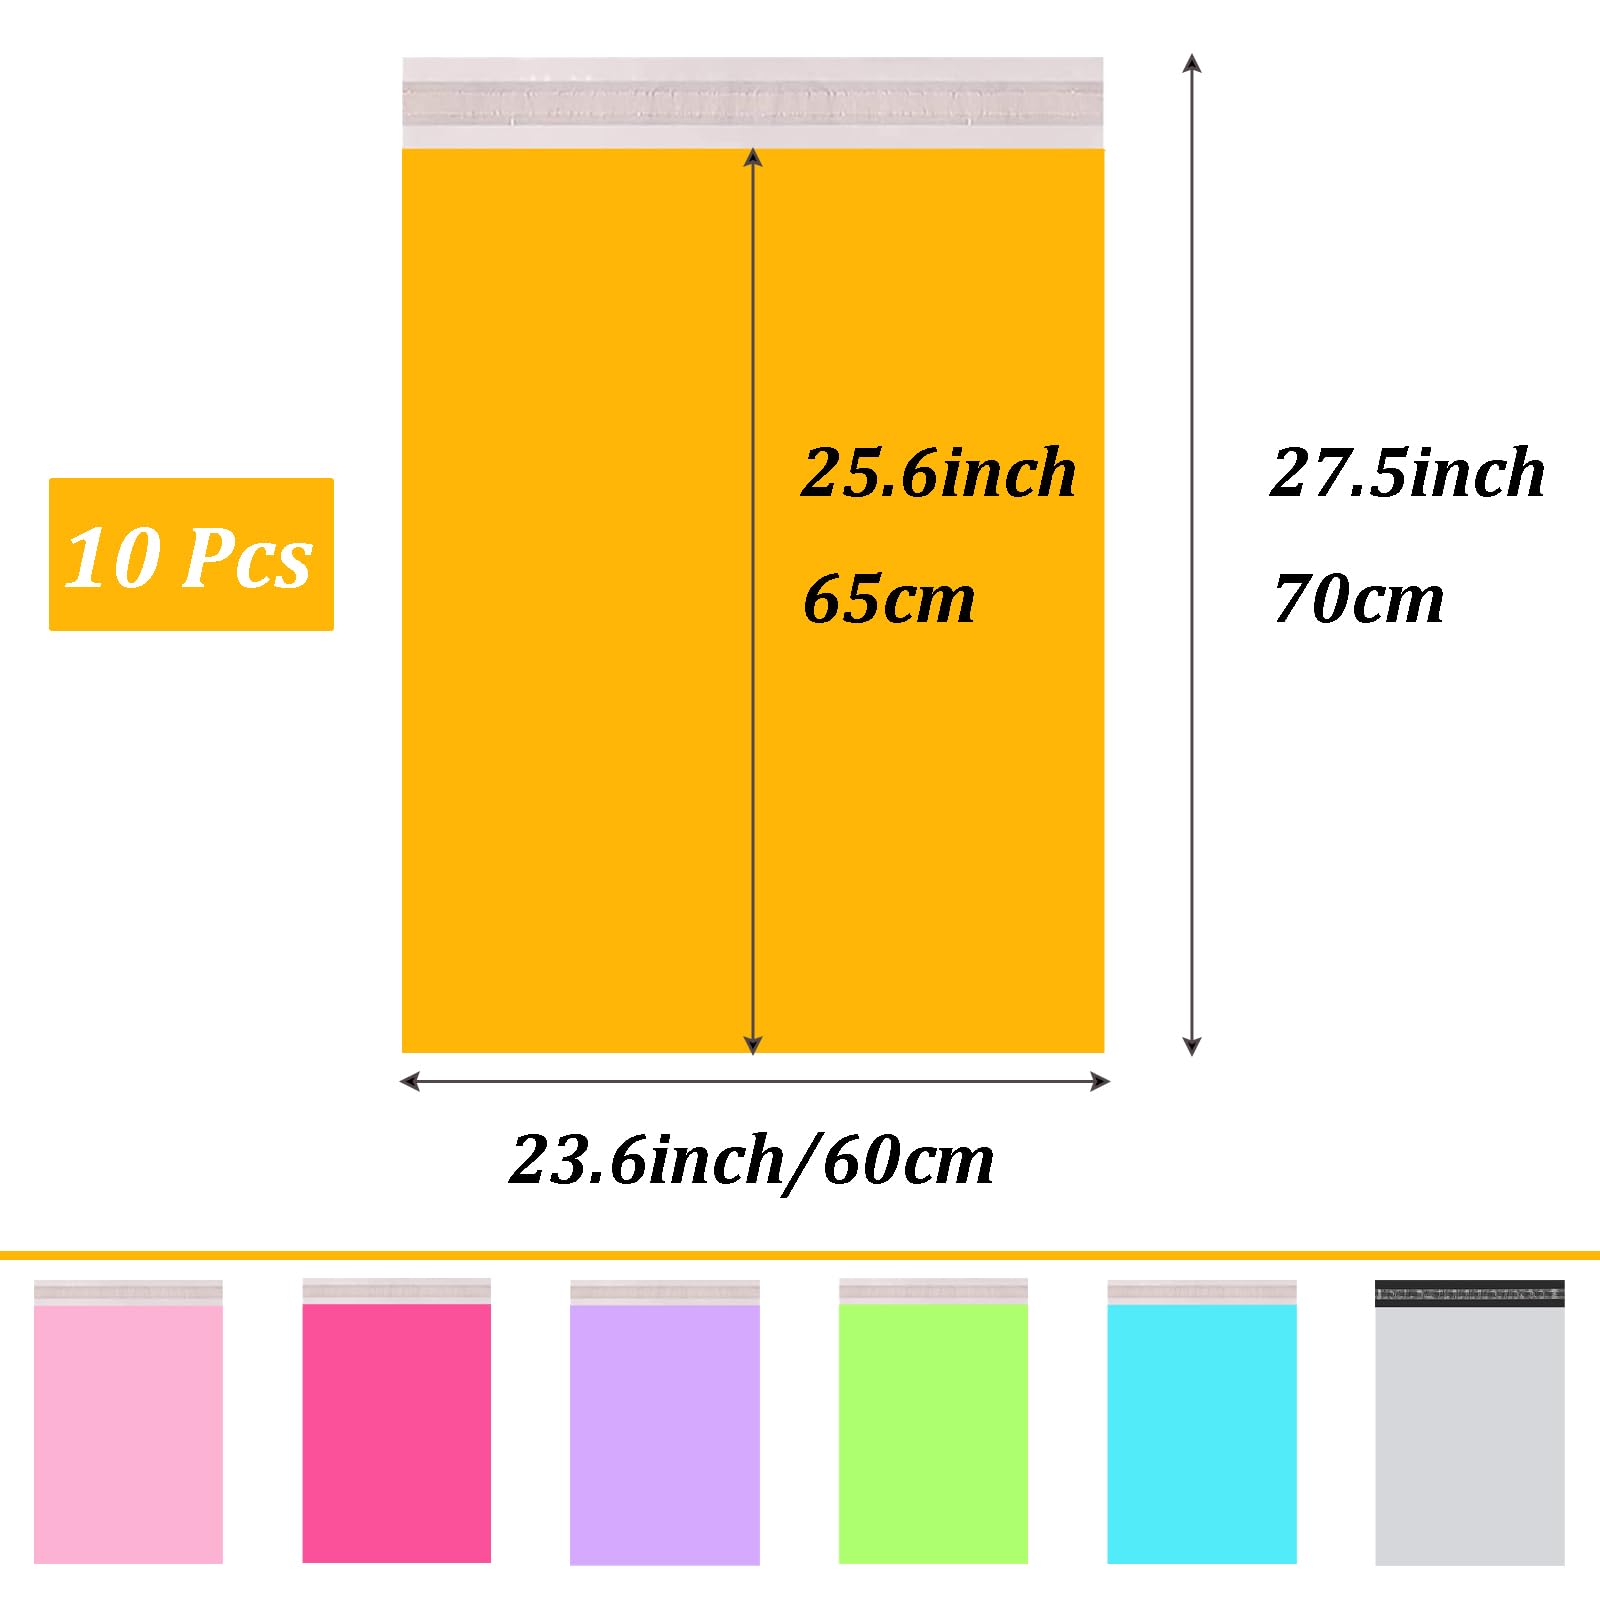 10PCS Mailing Bags Yellow Vinted Postage Bags Postal Self Seal Bags 24 inchesx28 inches (60x70cm) Parcel Bags Parcel Shipping Bags Parcel Delivery Bags,Extra Large Mailing Bags for Large Parcels Posting Clothes